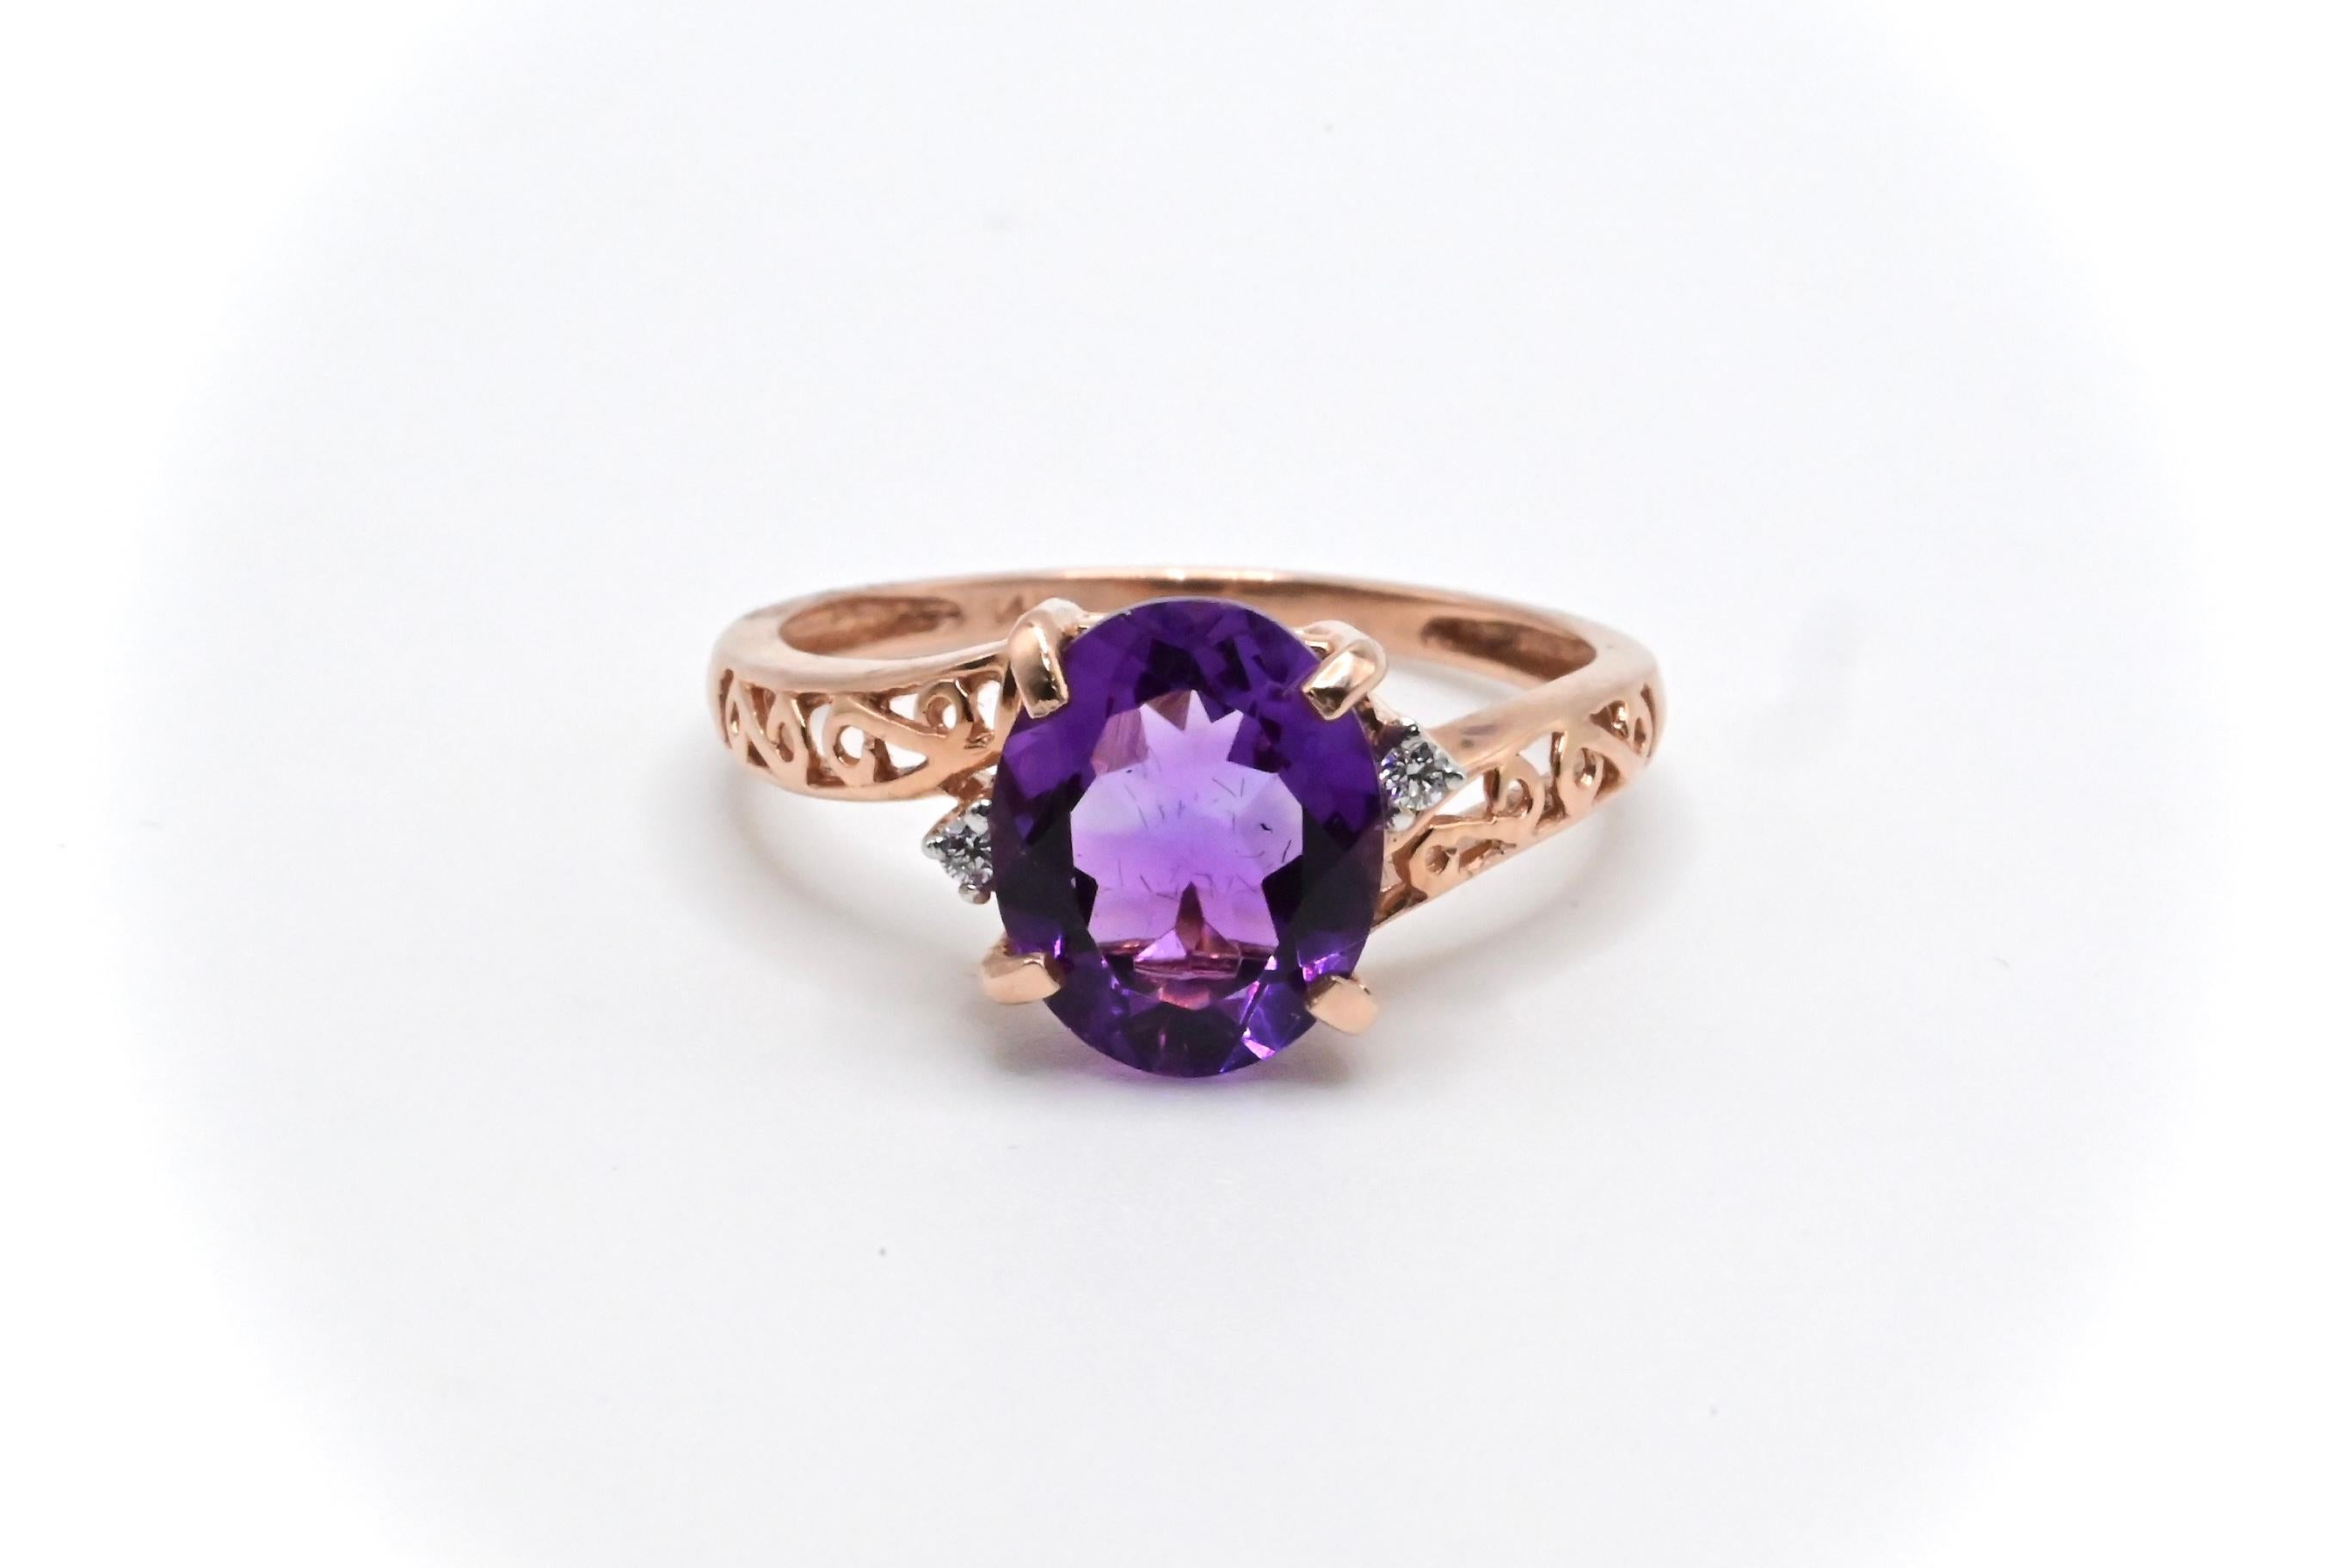 This is an eye catching 14k gold ring that’s made out of a sparkling oval cut purple amethyst, and a  round cut diamond complementing each side of the centerpiece. It’s a size 6 3/4, and weighs about 2 grams. It’s in excellent condition with little